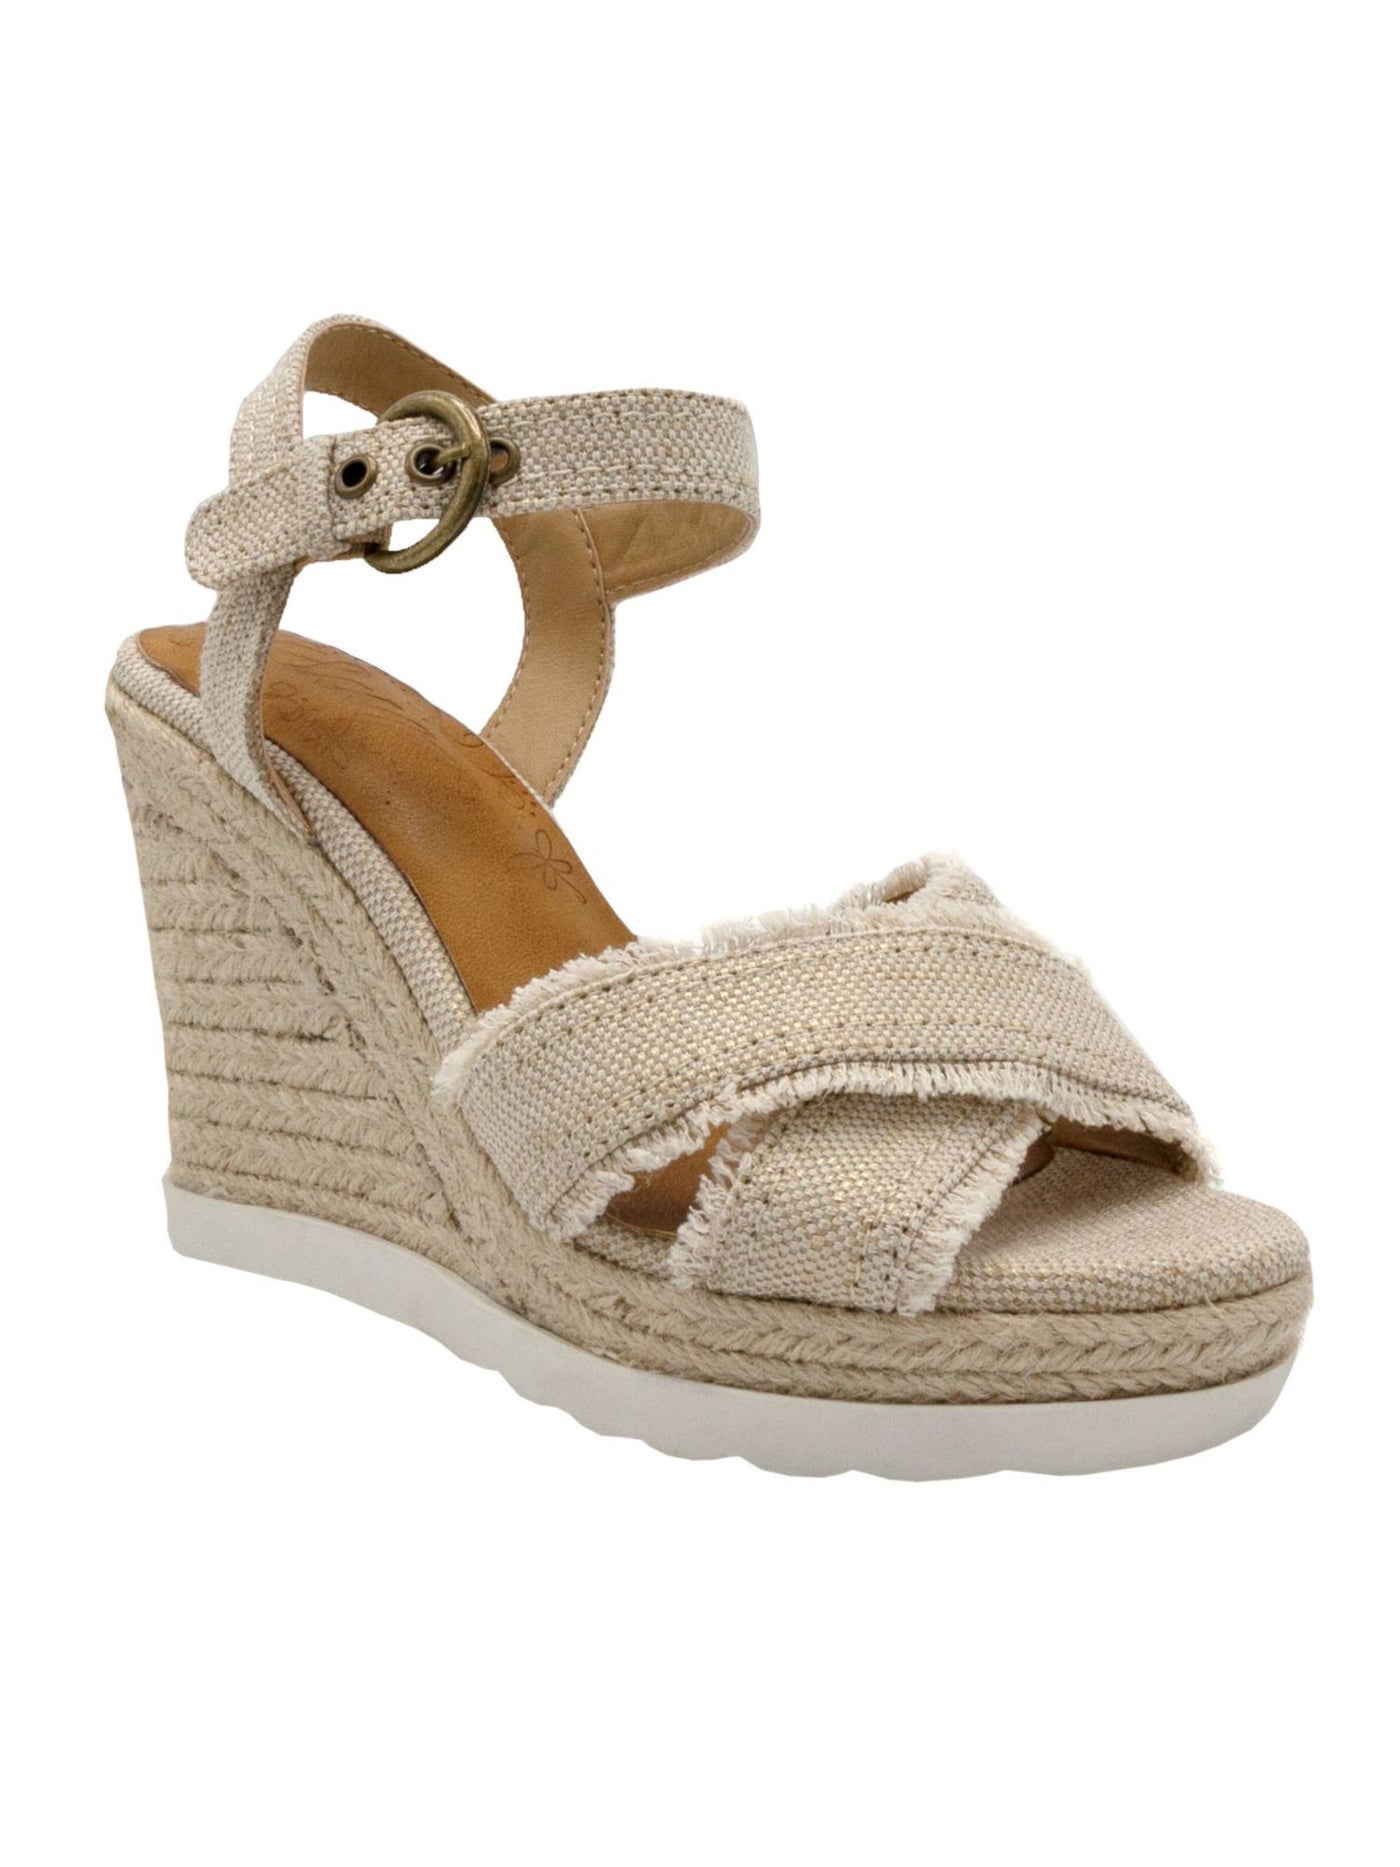 SUGAR Womens Beige Frayed Padded Jute Adjustable Strap Woven Fave Round Toe Wedge Buckle Espadrille Shoes 8 M